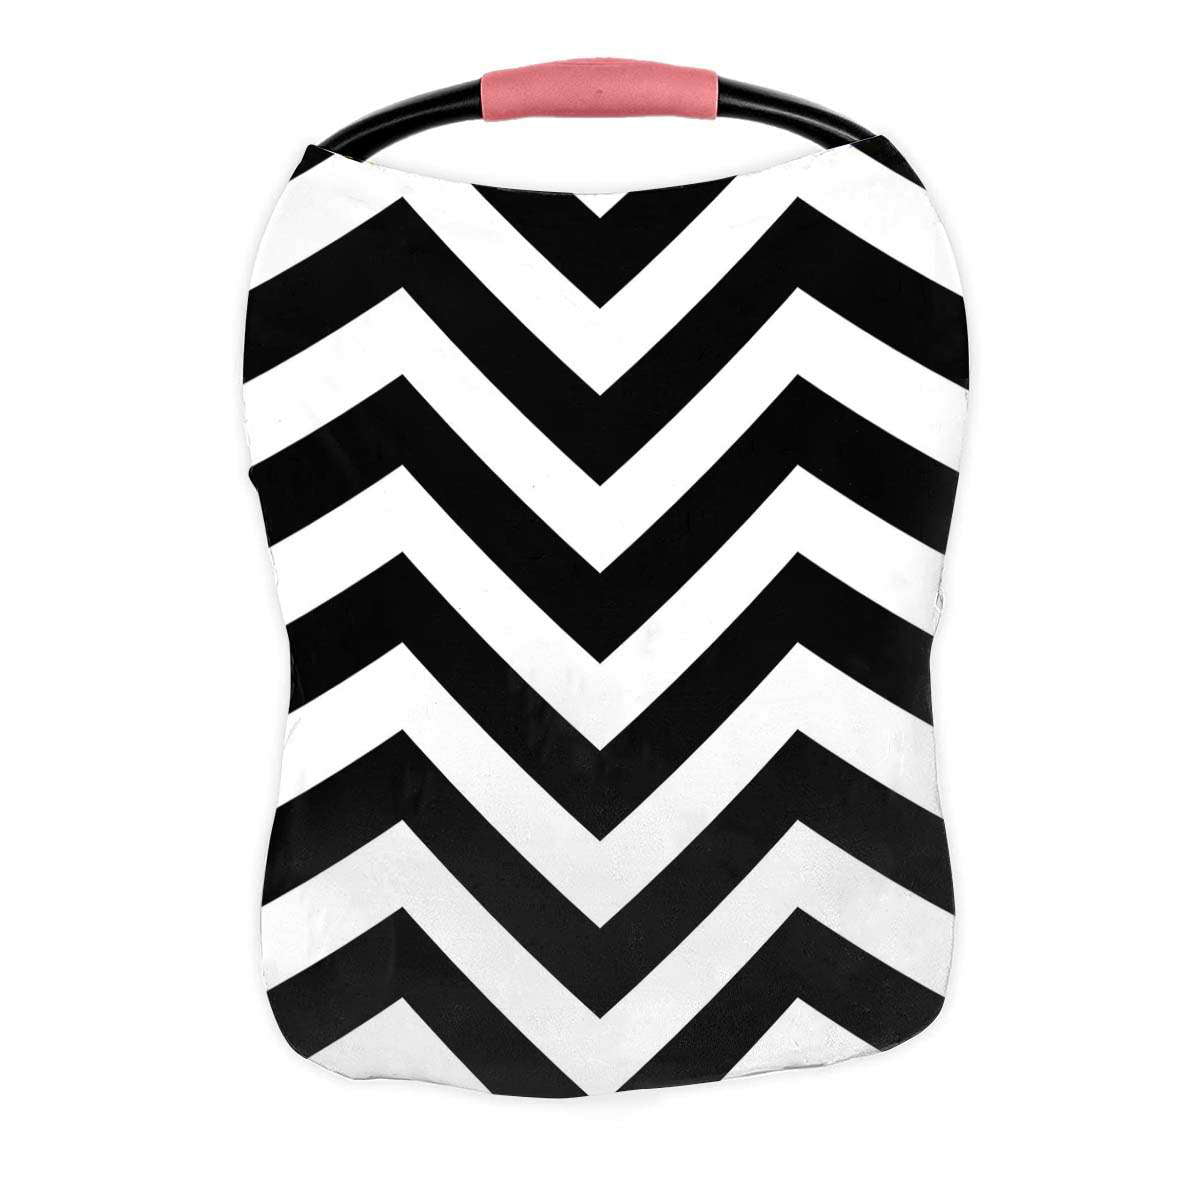 GREY WHITE BLUE CHEVRONS  BABY CAR SEAT COVER HARNESS COVERS APRON NEW ZIG ZAG 